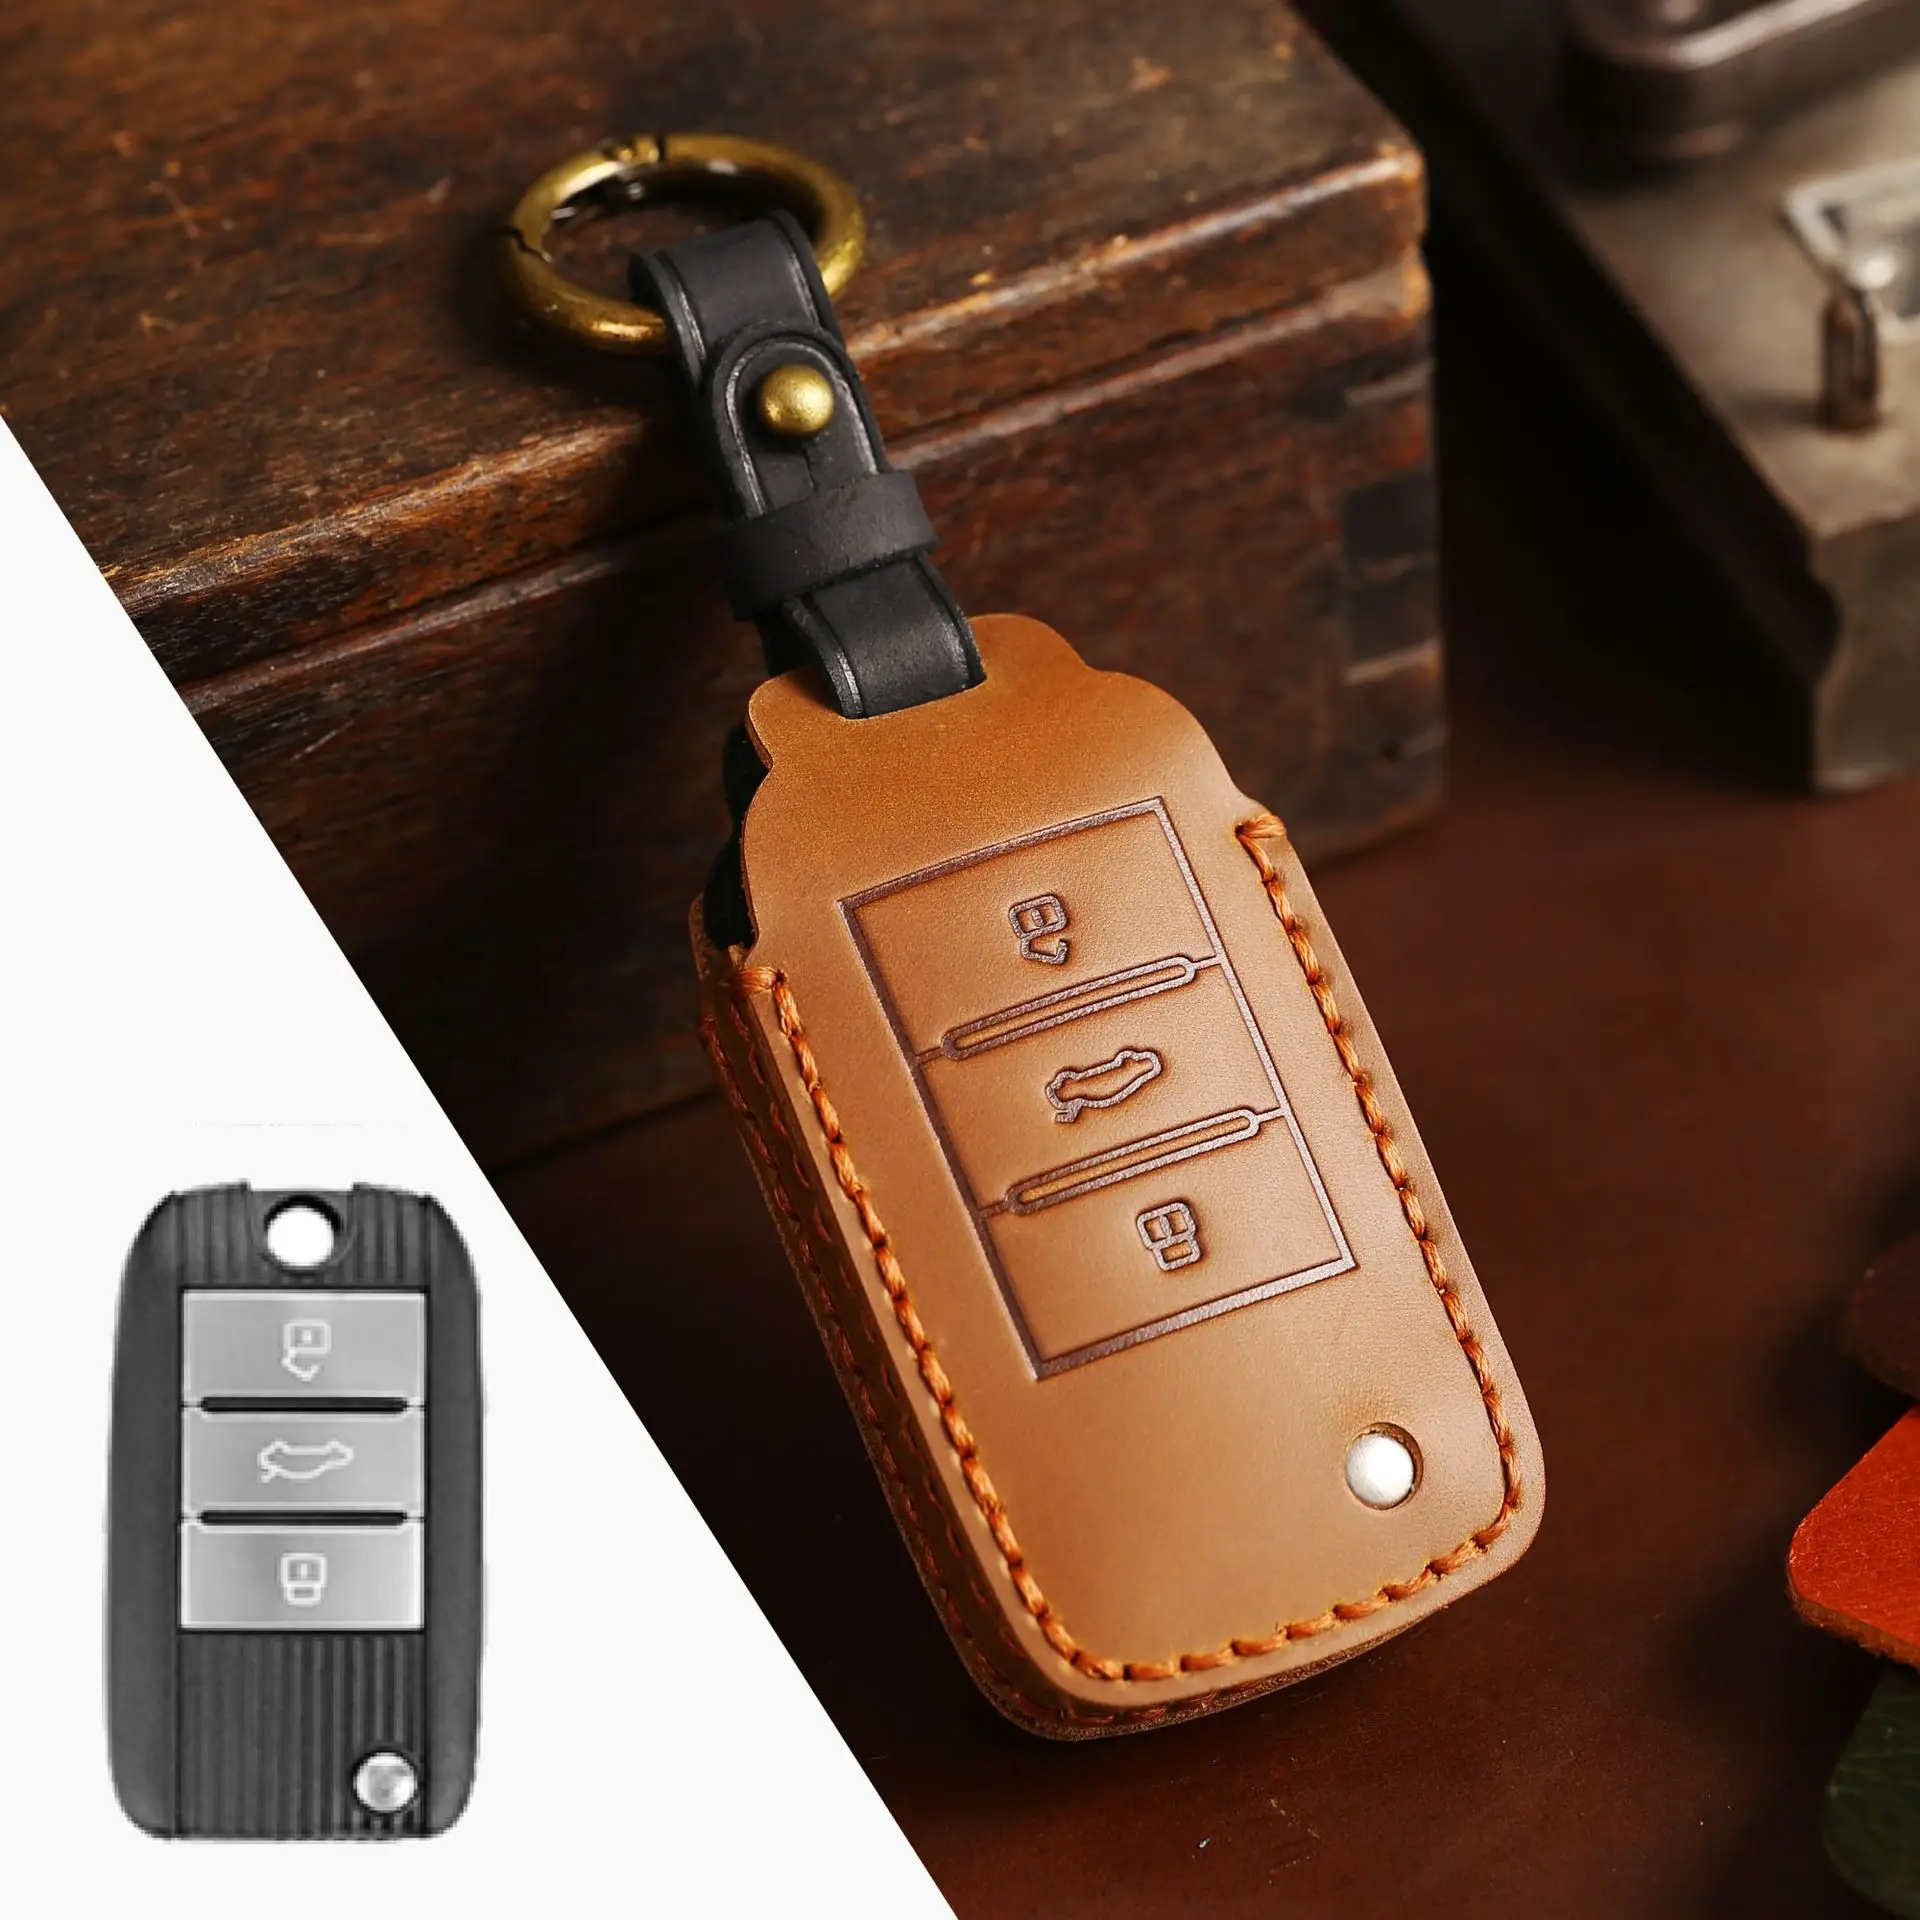 

Crazy Horse Leather Car Key Case Cover Fob Shell for Roewe RX5 MG3 MG5 MG6 MG7 MG ZS GT GS 350 360 750 Keychain